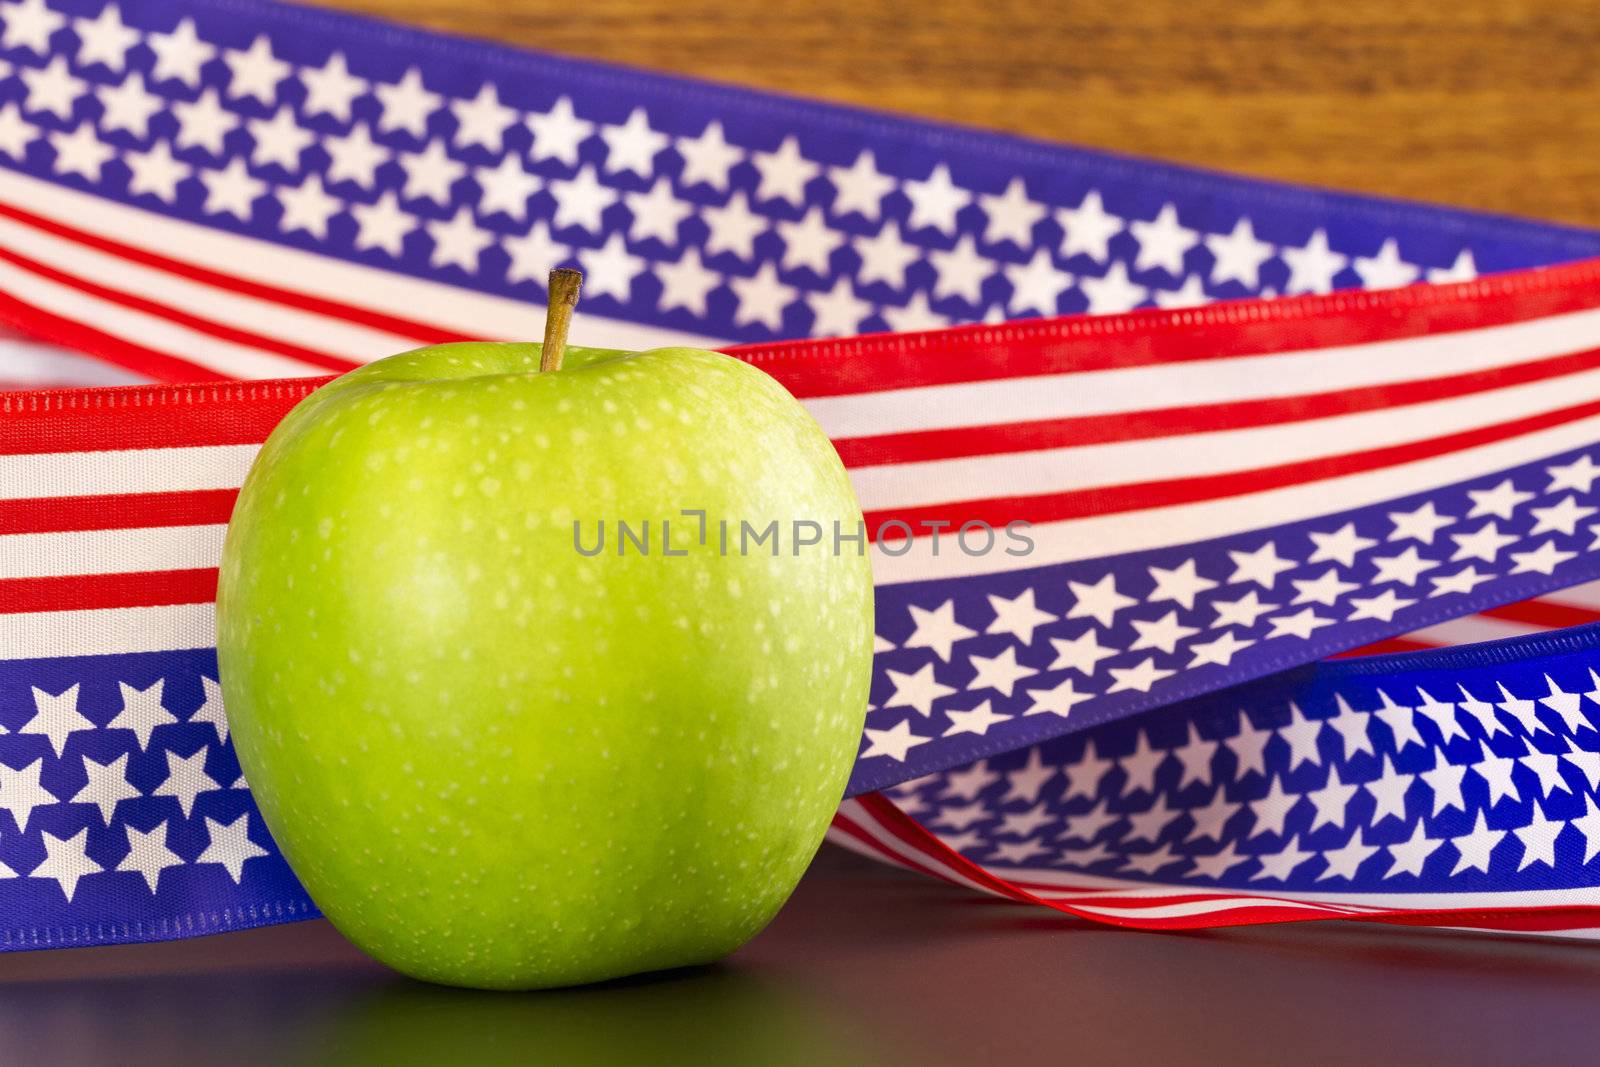 Green apple placed on  stars and stripes ribbon with USA flag motif; apple suggests school, education, environment, as well as health, food, obesity, fitness issues that impact the nation. 